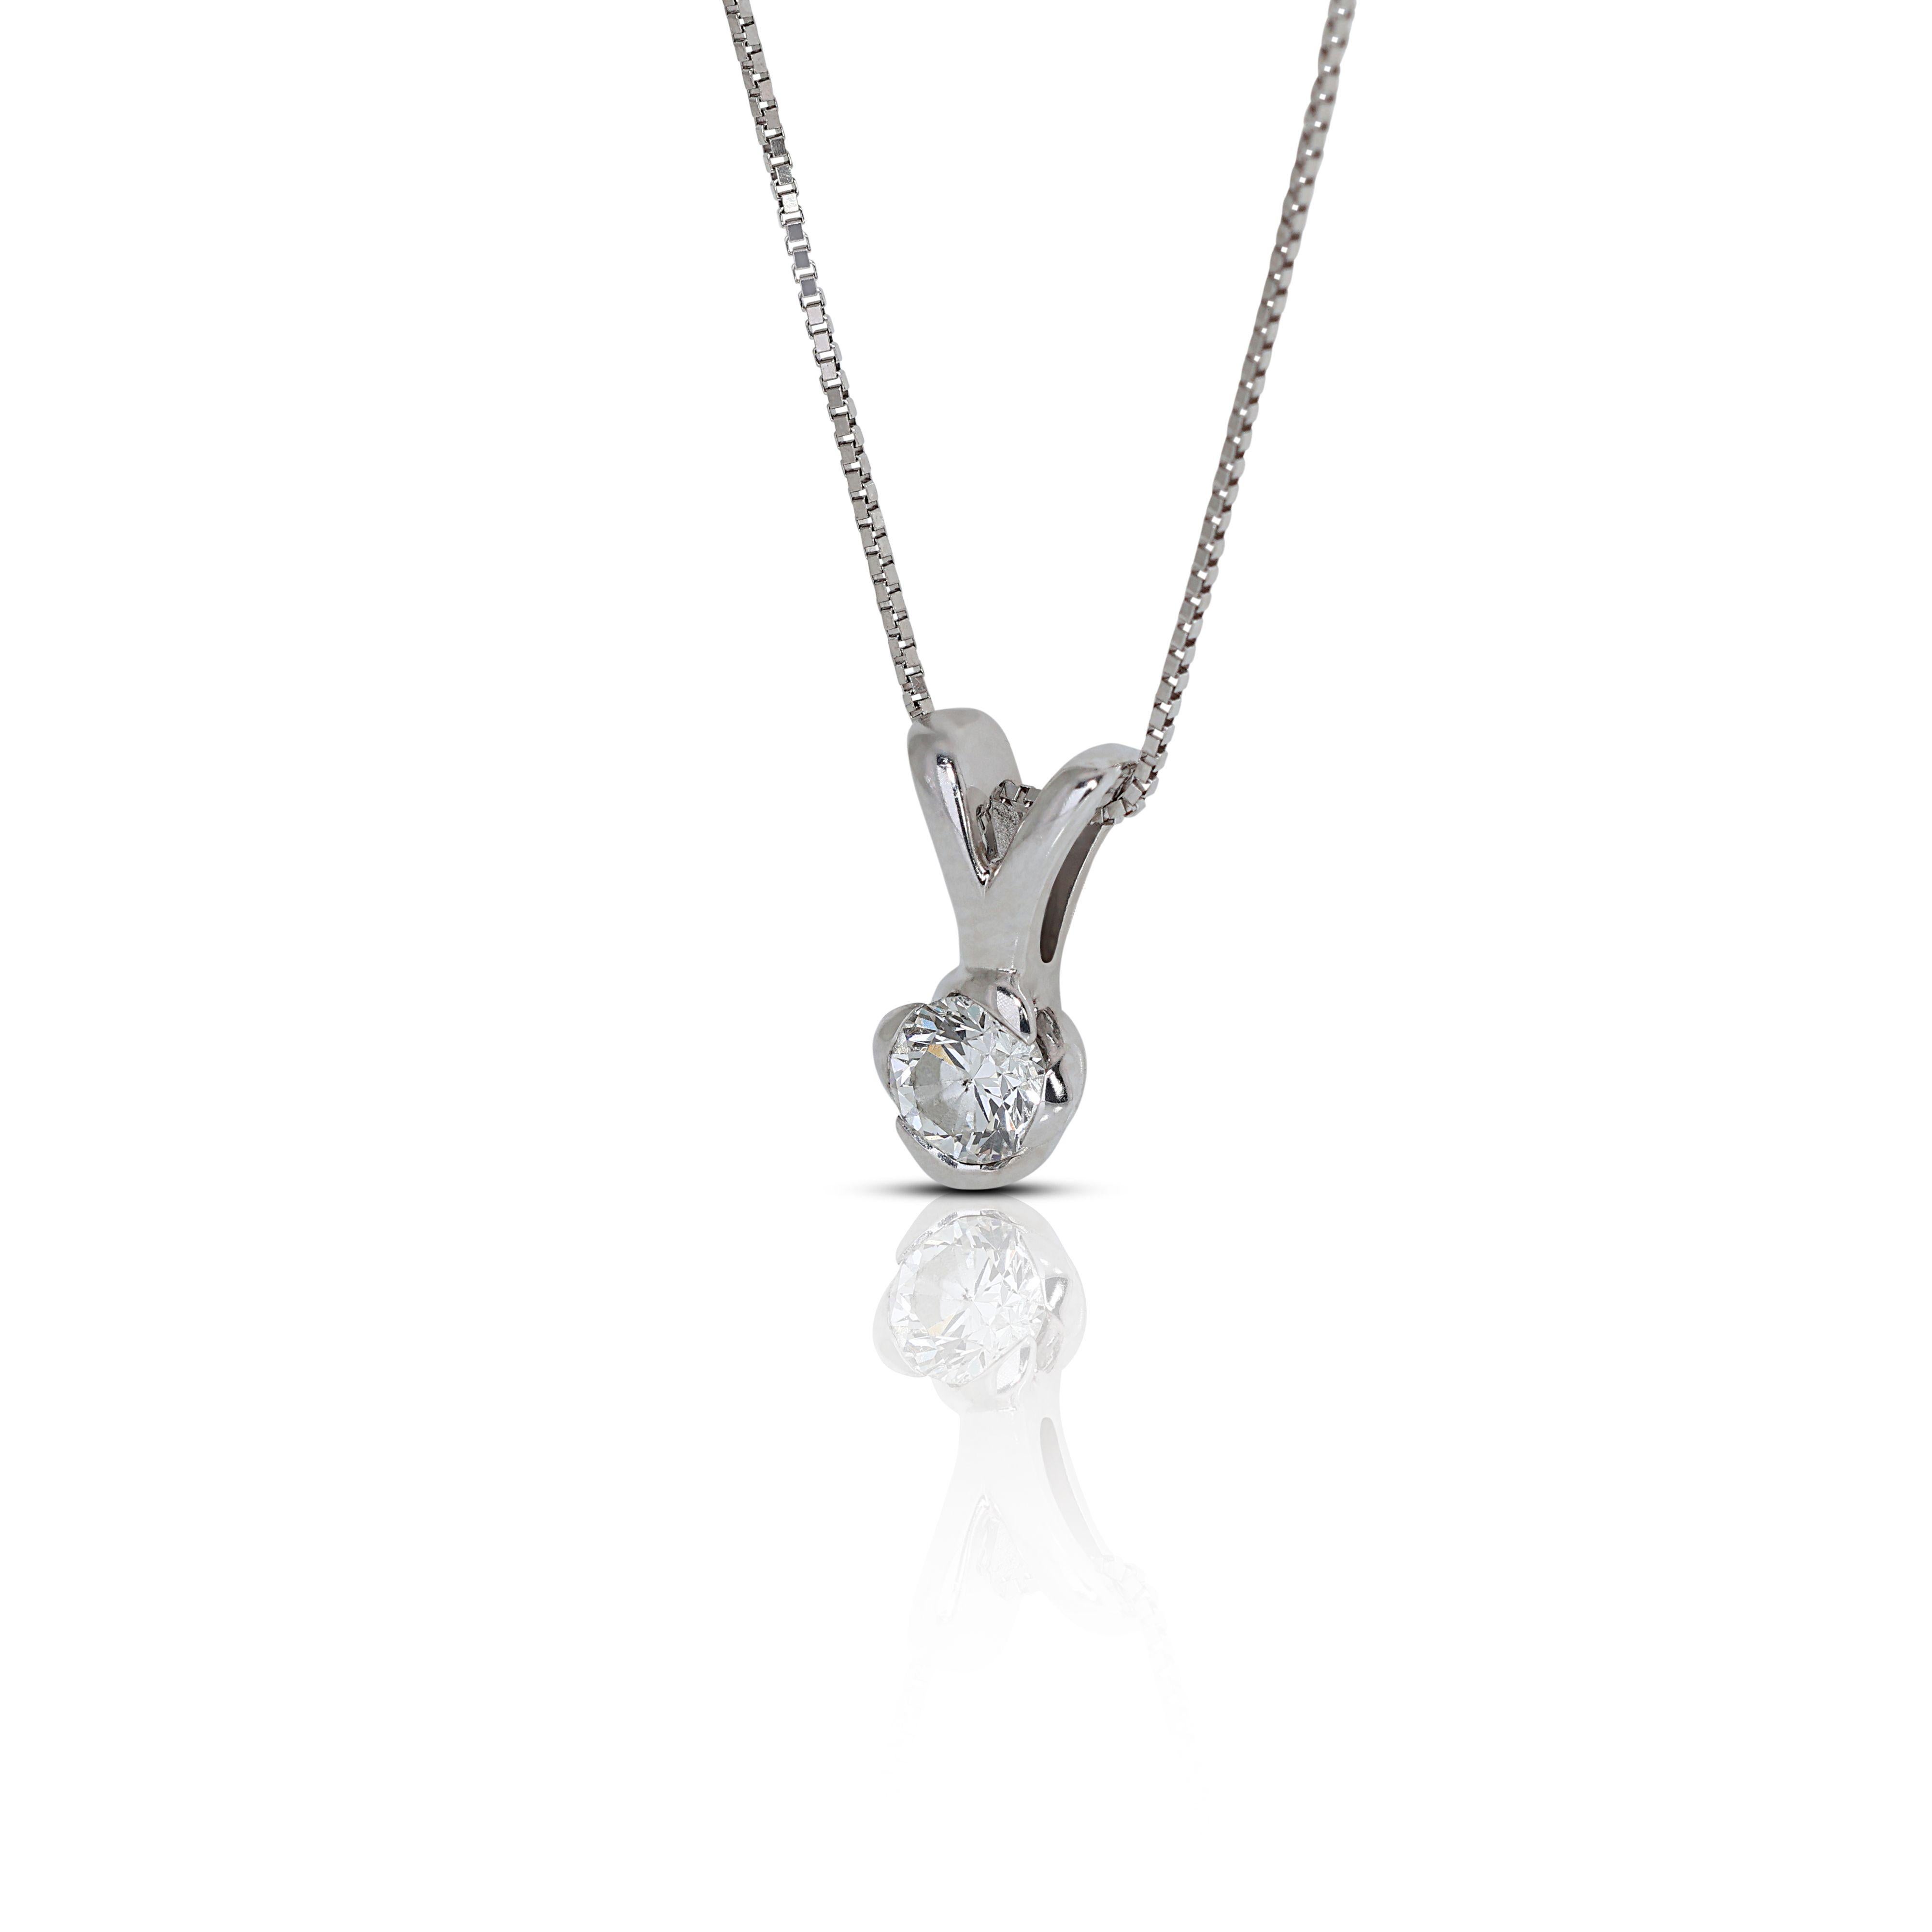 Sultry White Gold Solitaire Diamond Necklace In Excellent Condition For Sale In רמת גן, IL